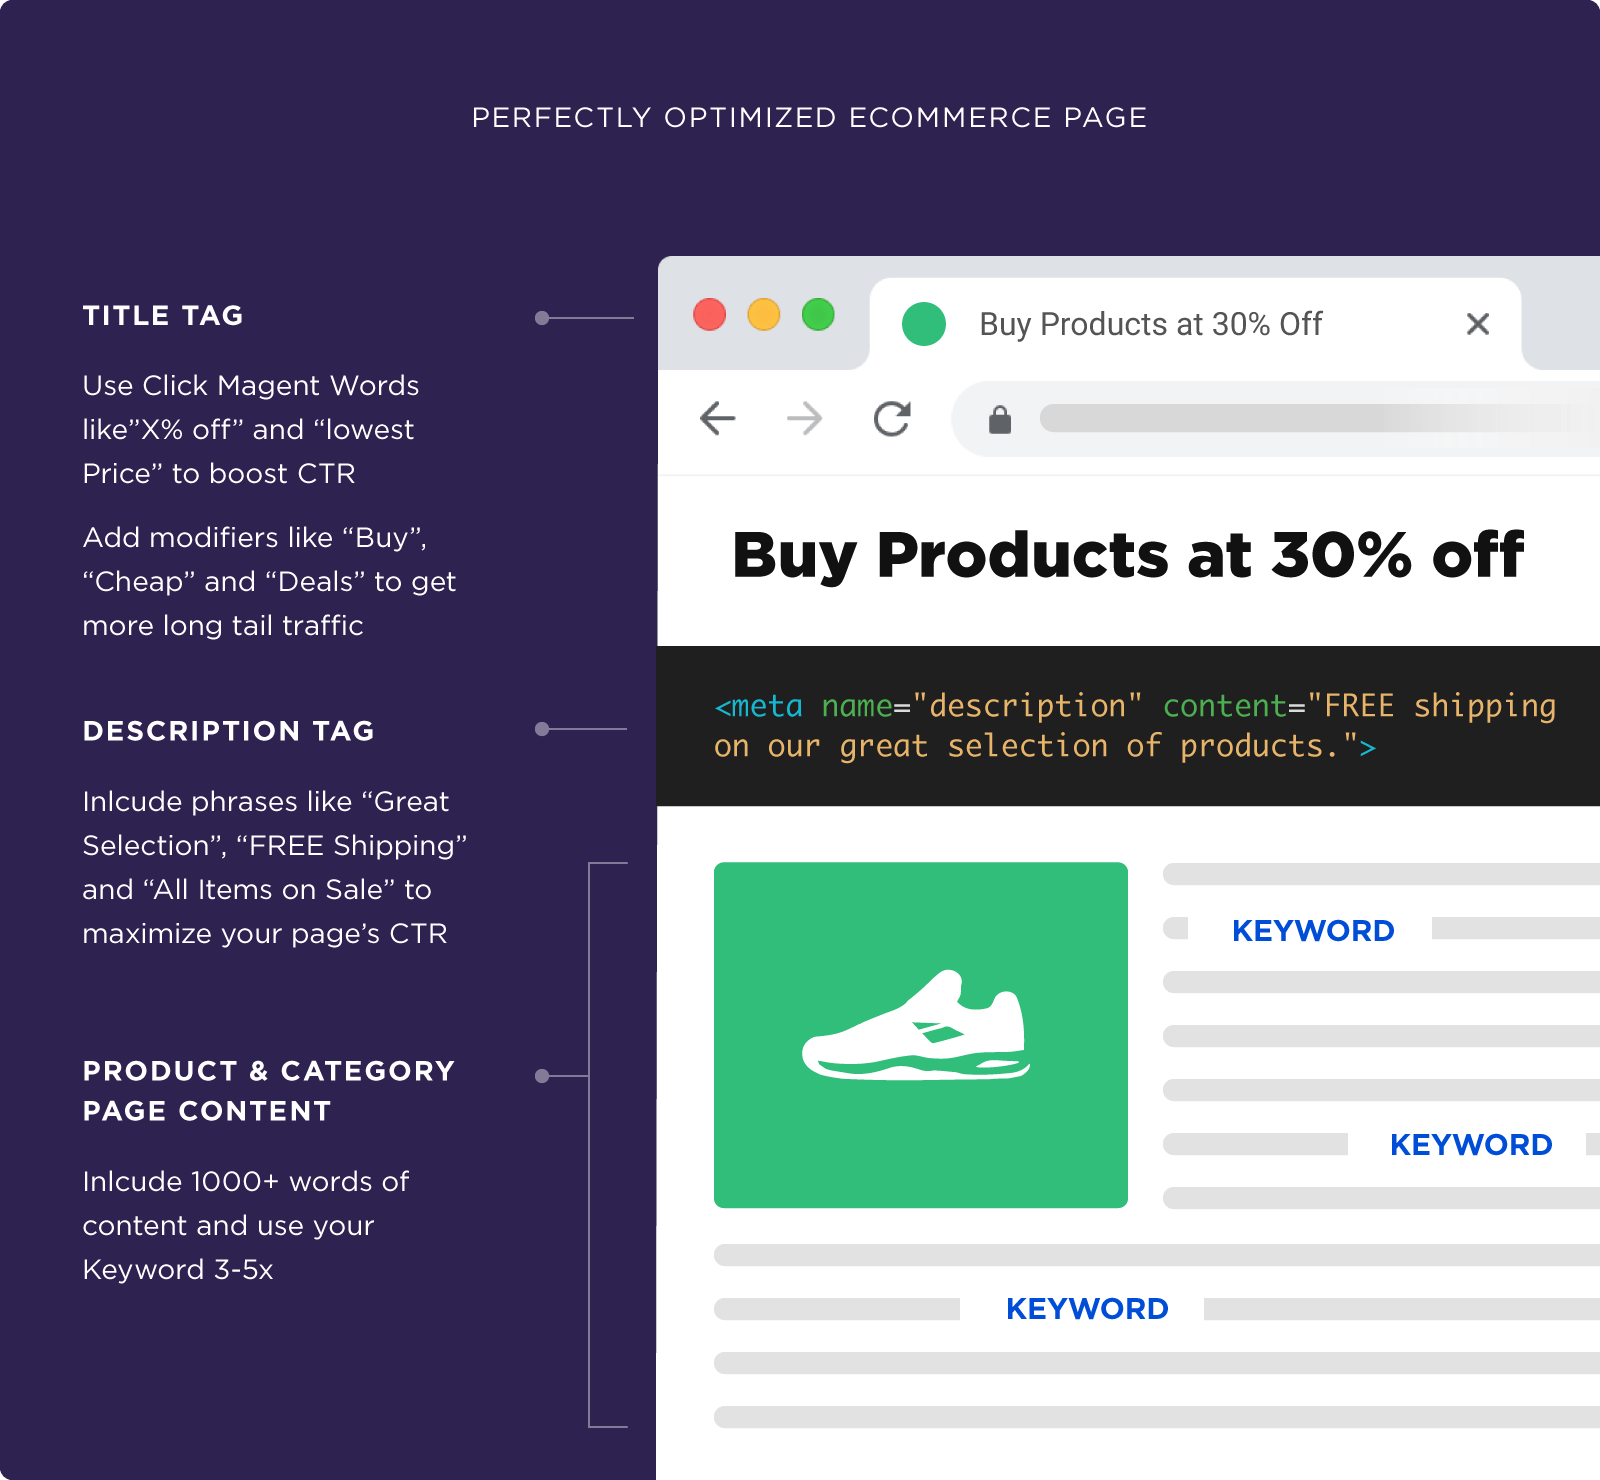 Perfectly optimized ecommerce page